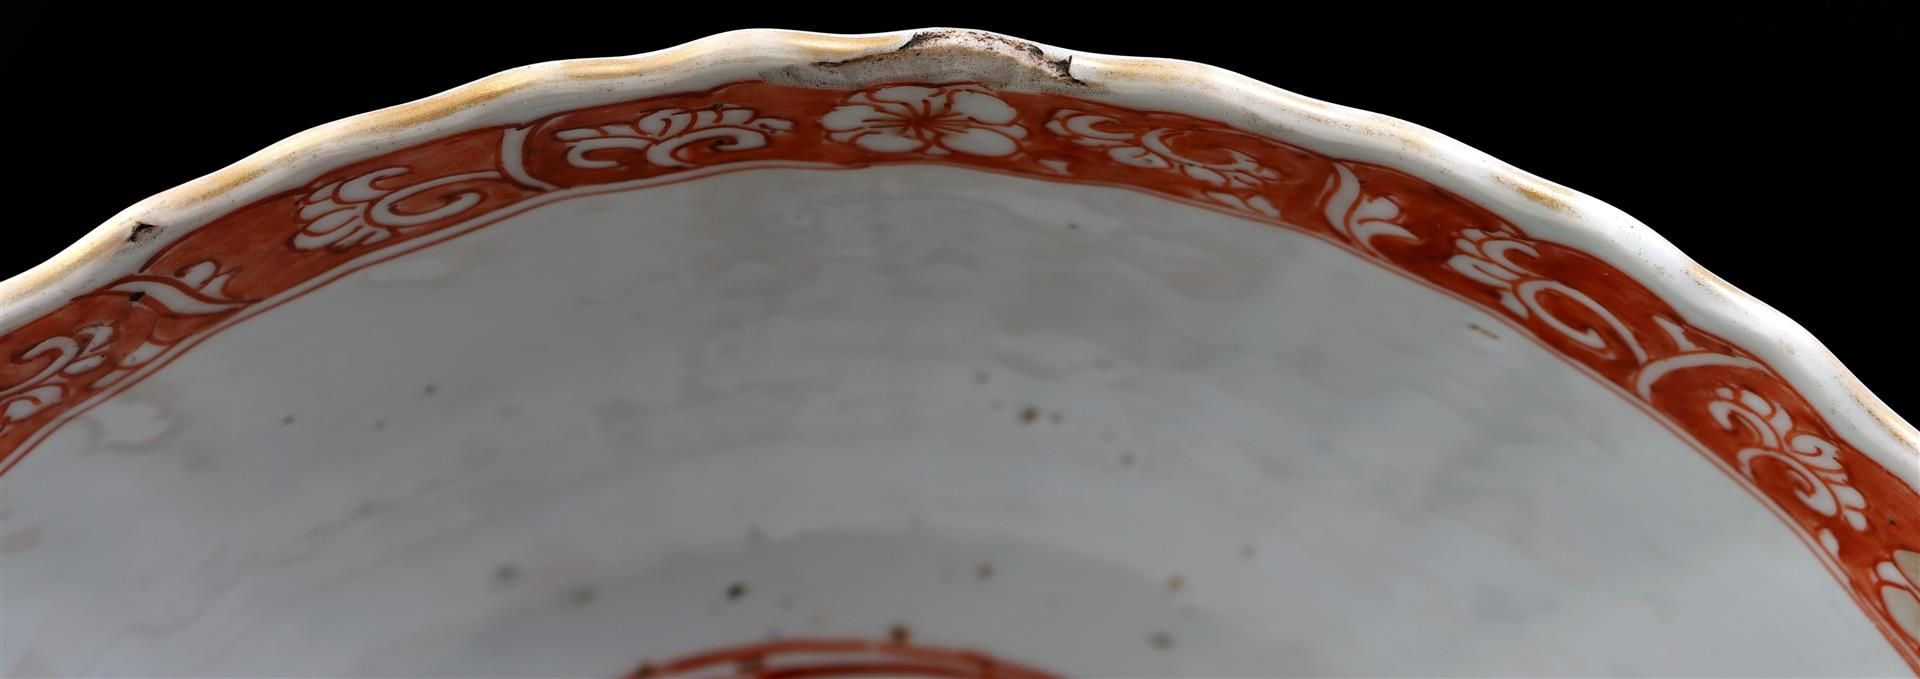 2 Chinese Famille vert porcelain bowls, 18th century, 9 cm high, approx. 20 cm in diameter (hairline - Image 2 of 6